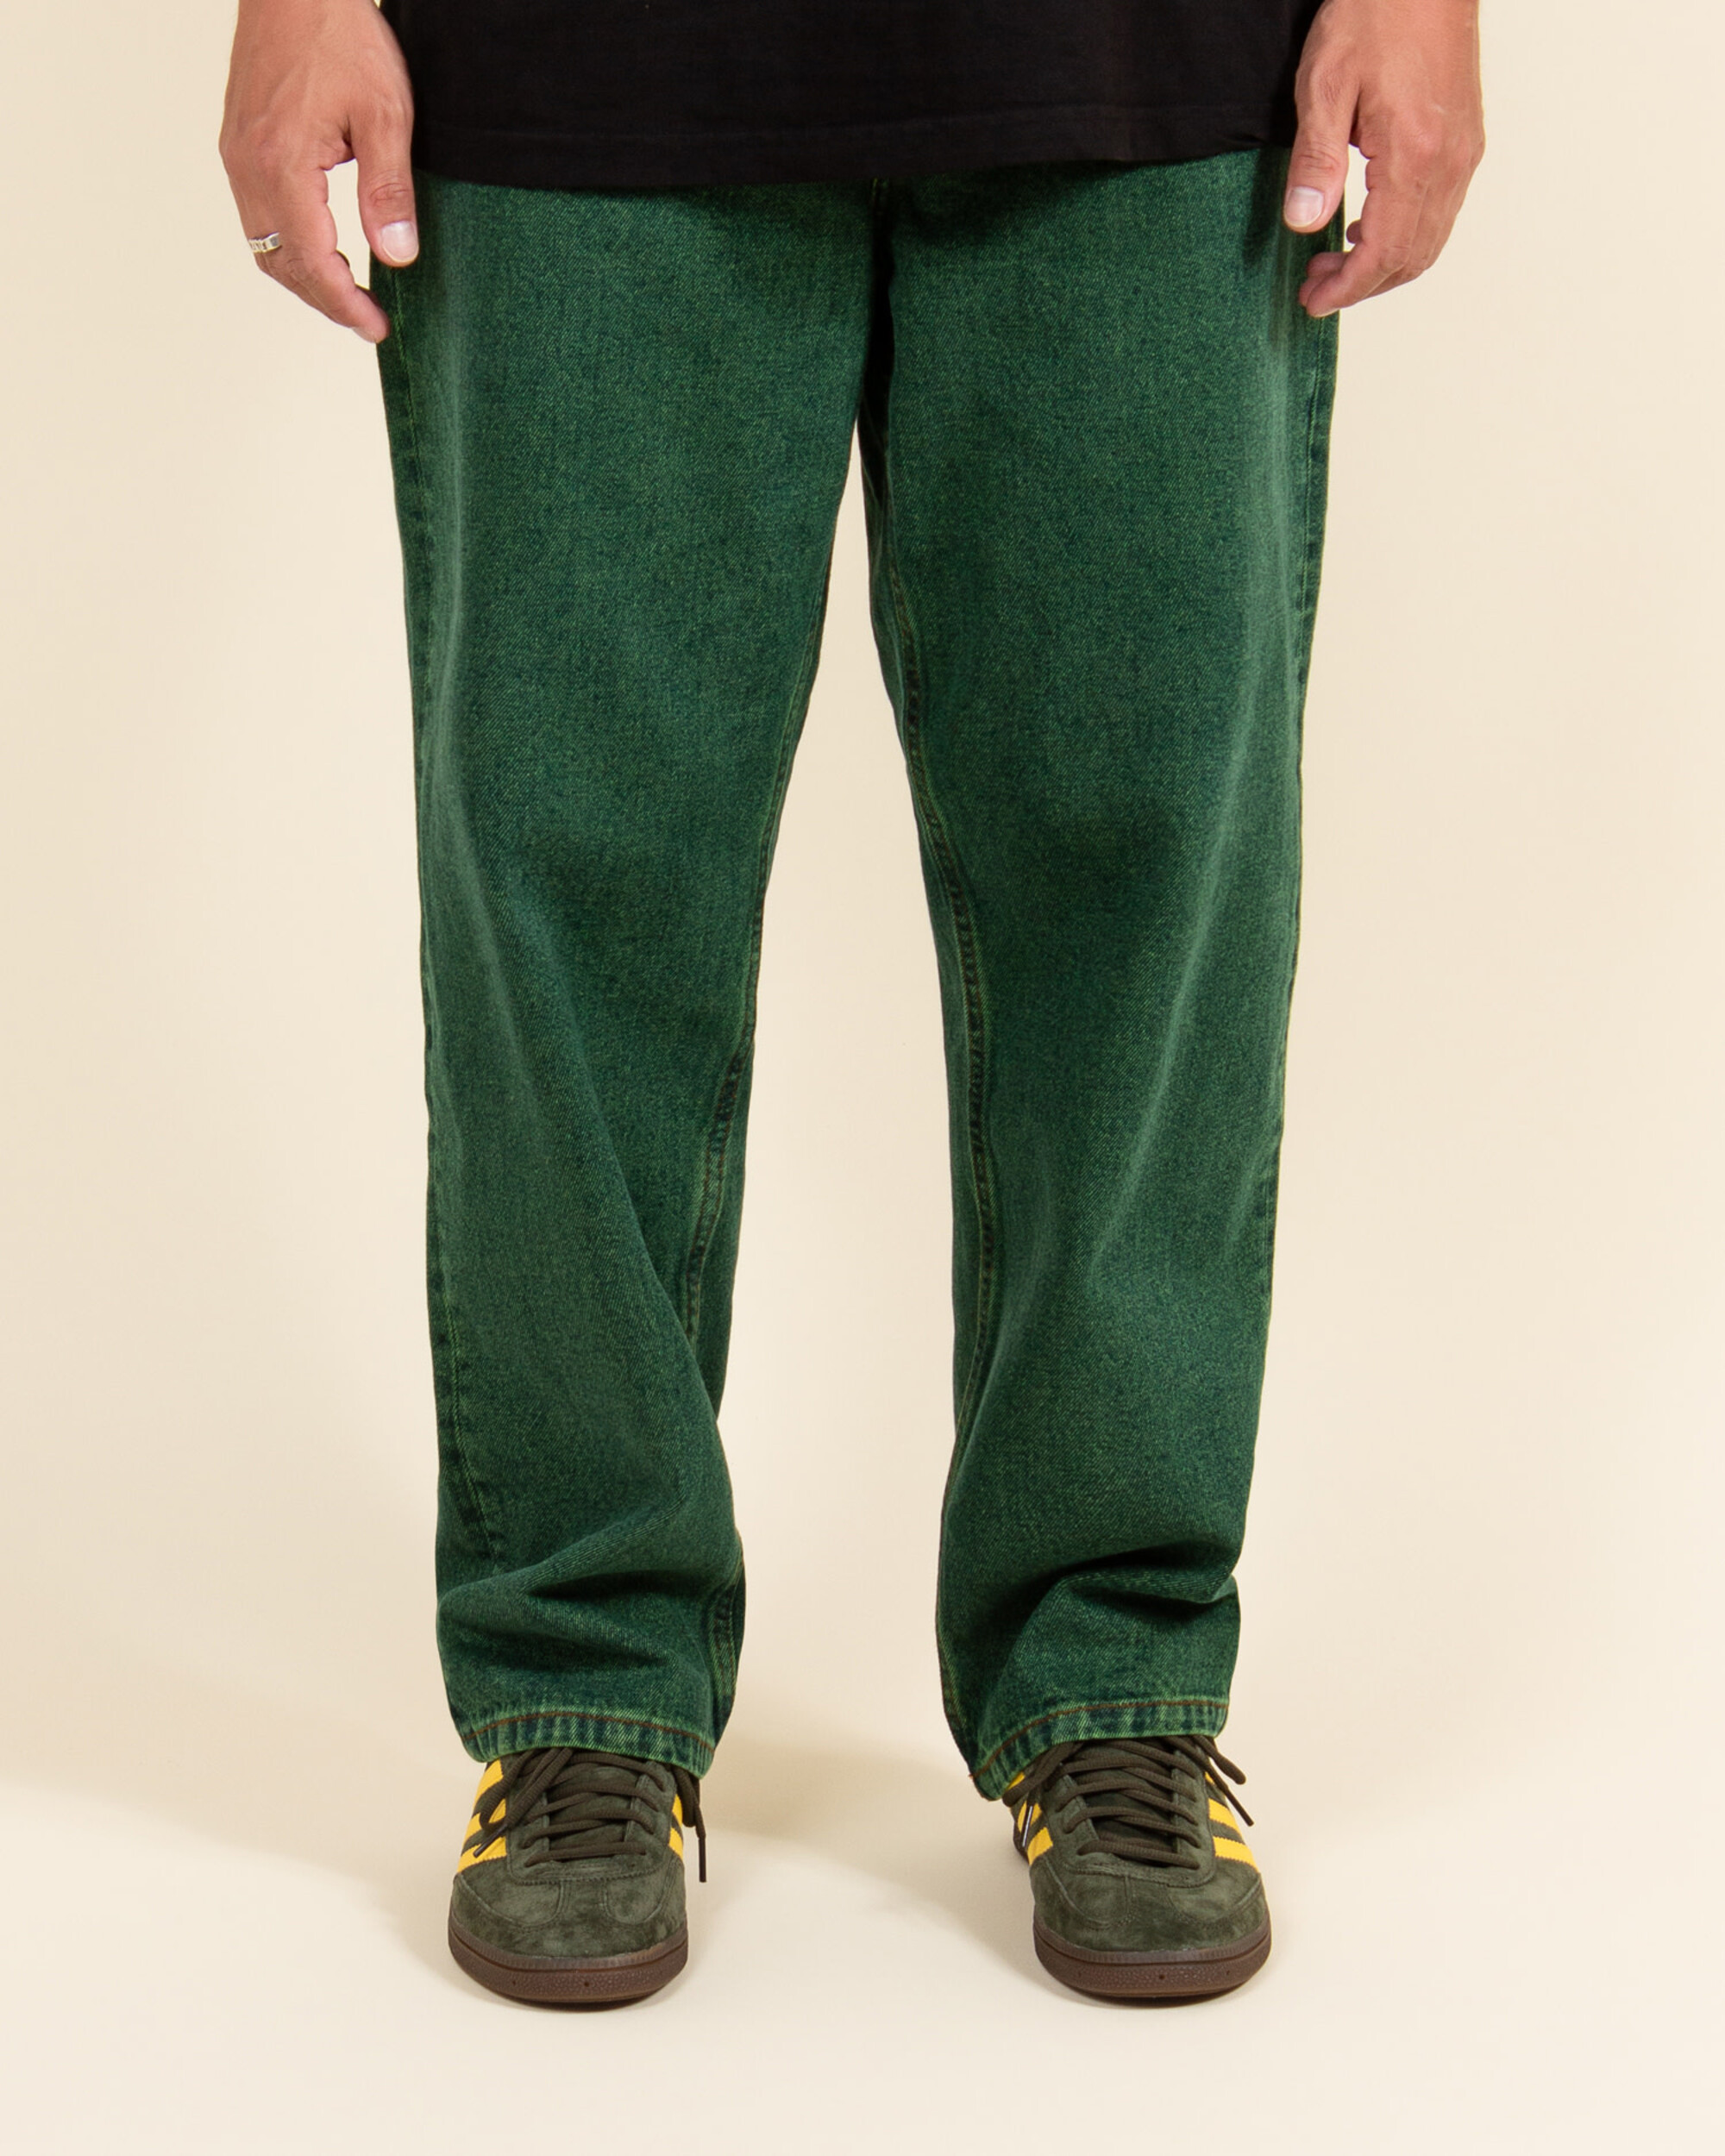 Lockwood Baggy Jeans - Poison Green